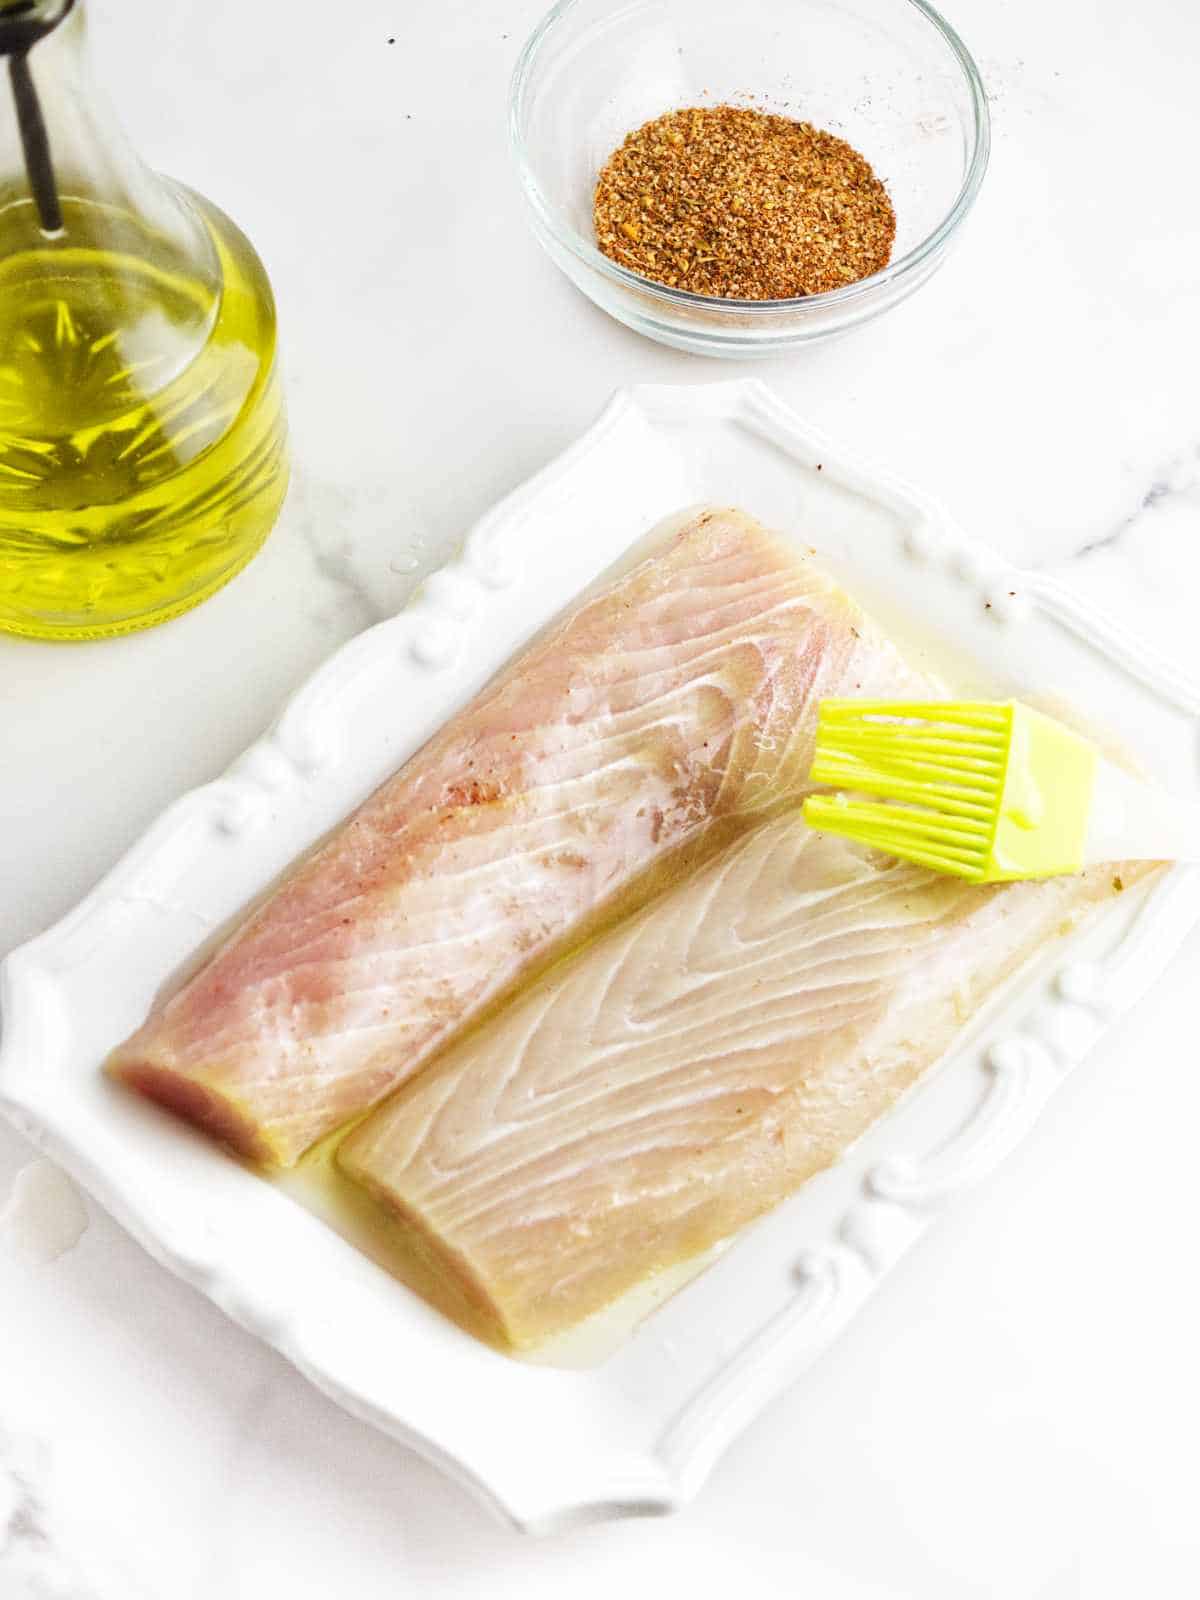 fish fillets brushed with olive oil.